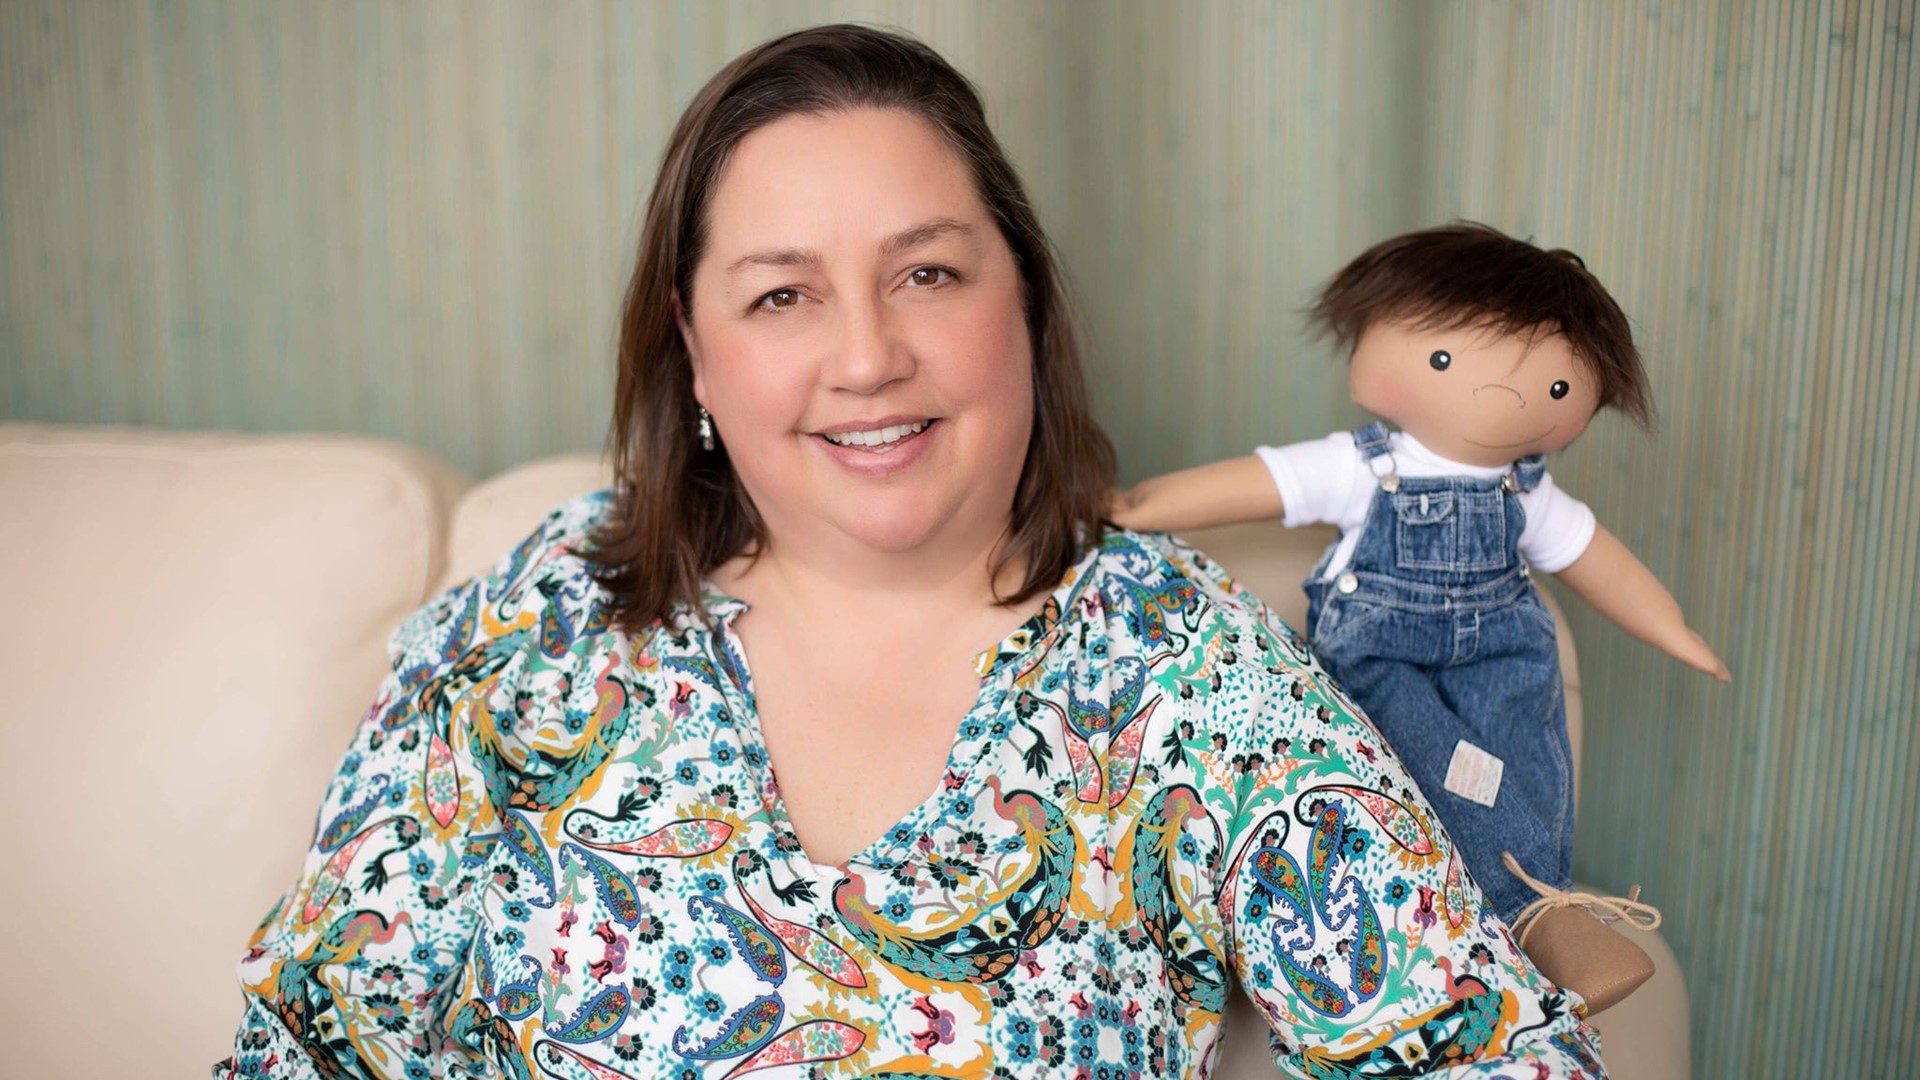 For kids with scars, burns, missing limbs, or dealing with other medical conditions, it can be hard to fit in—or find a doll that looks like them. Amy is trying to change that with 'A Doll Like Me.'